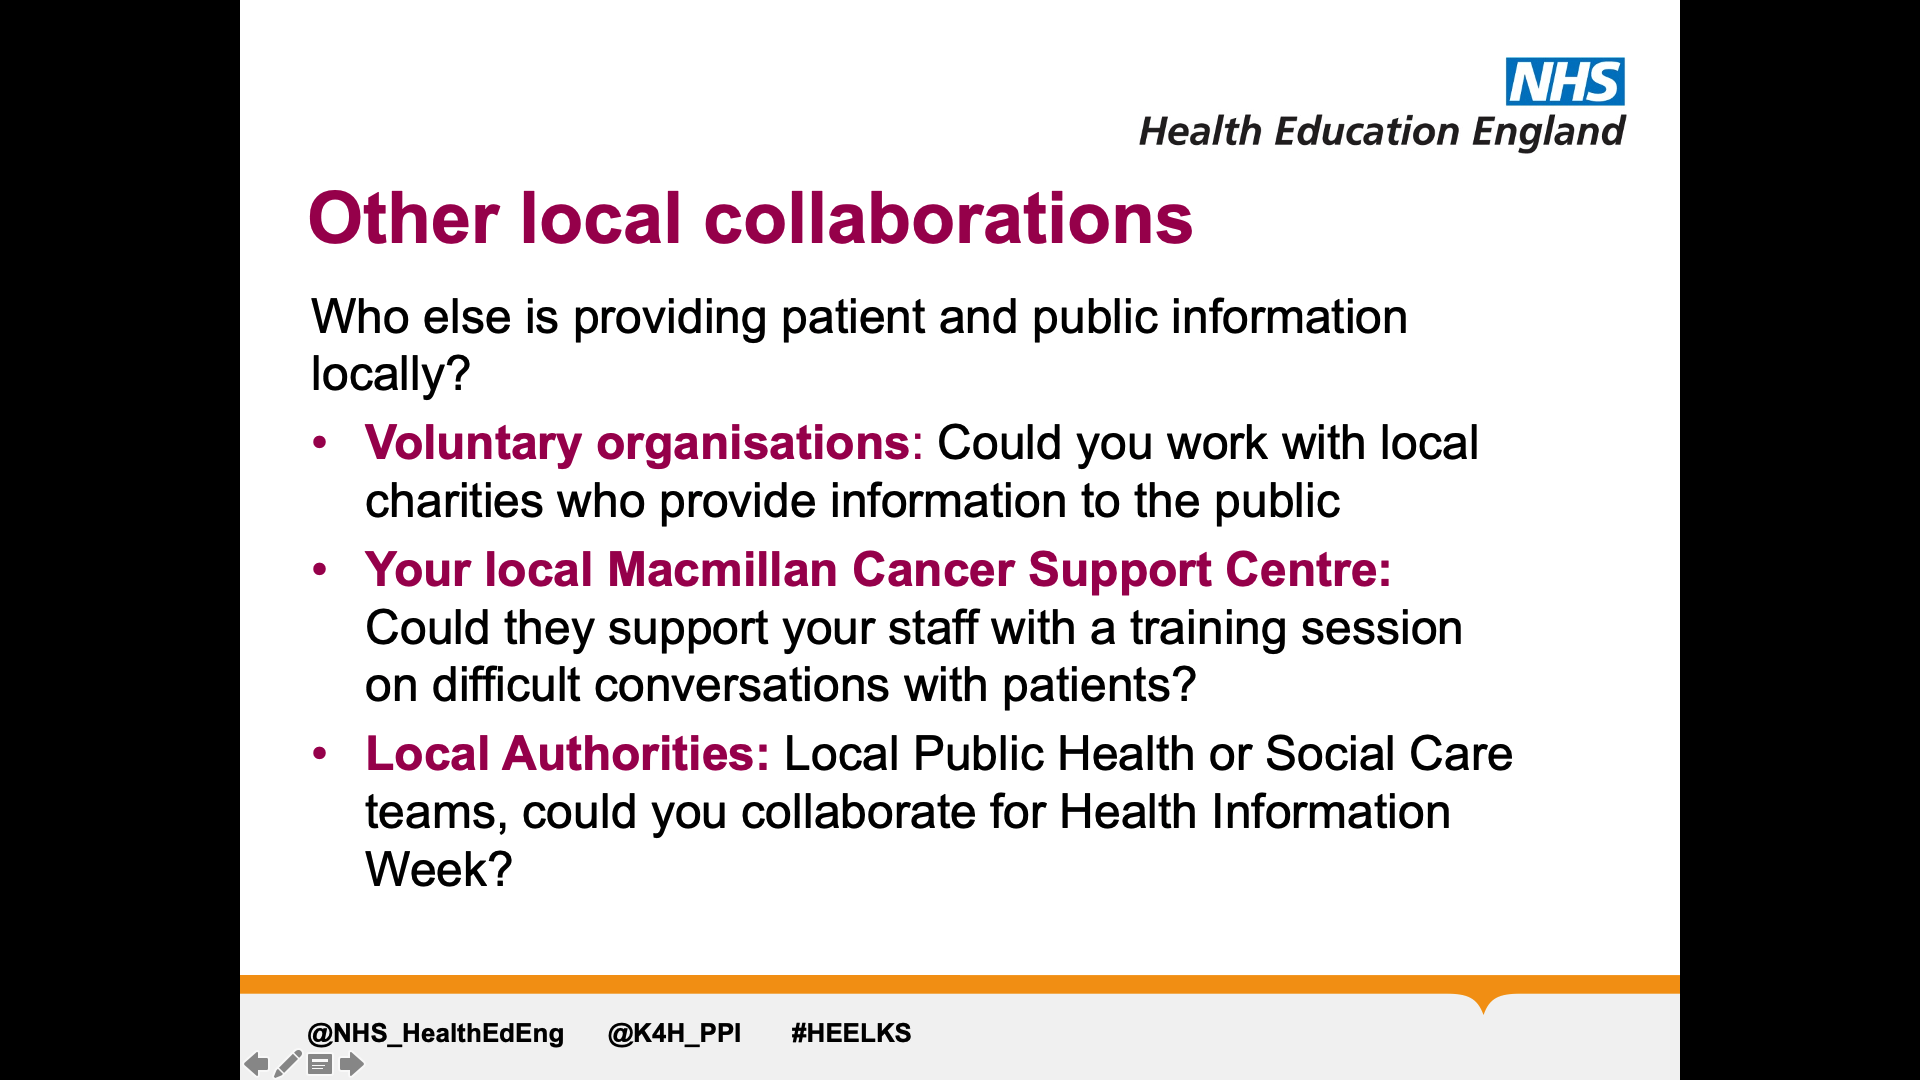 Title: Other local collaborations. Text on page: Who else is providing patient and public information locally? Voluntary organisations: Could you work with local charities who provide information to the public Your local Macmillan Cancer Support Centre: Could they support your staff with a training session on difficult conversations with patients? Local Authorities: Local Public Health or Social Care teams, could you collaborate for Health Information Week?